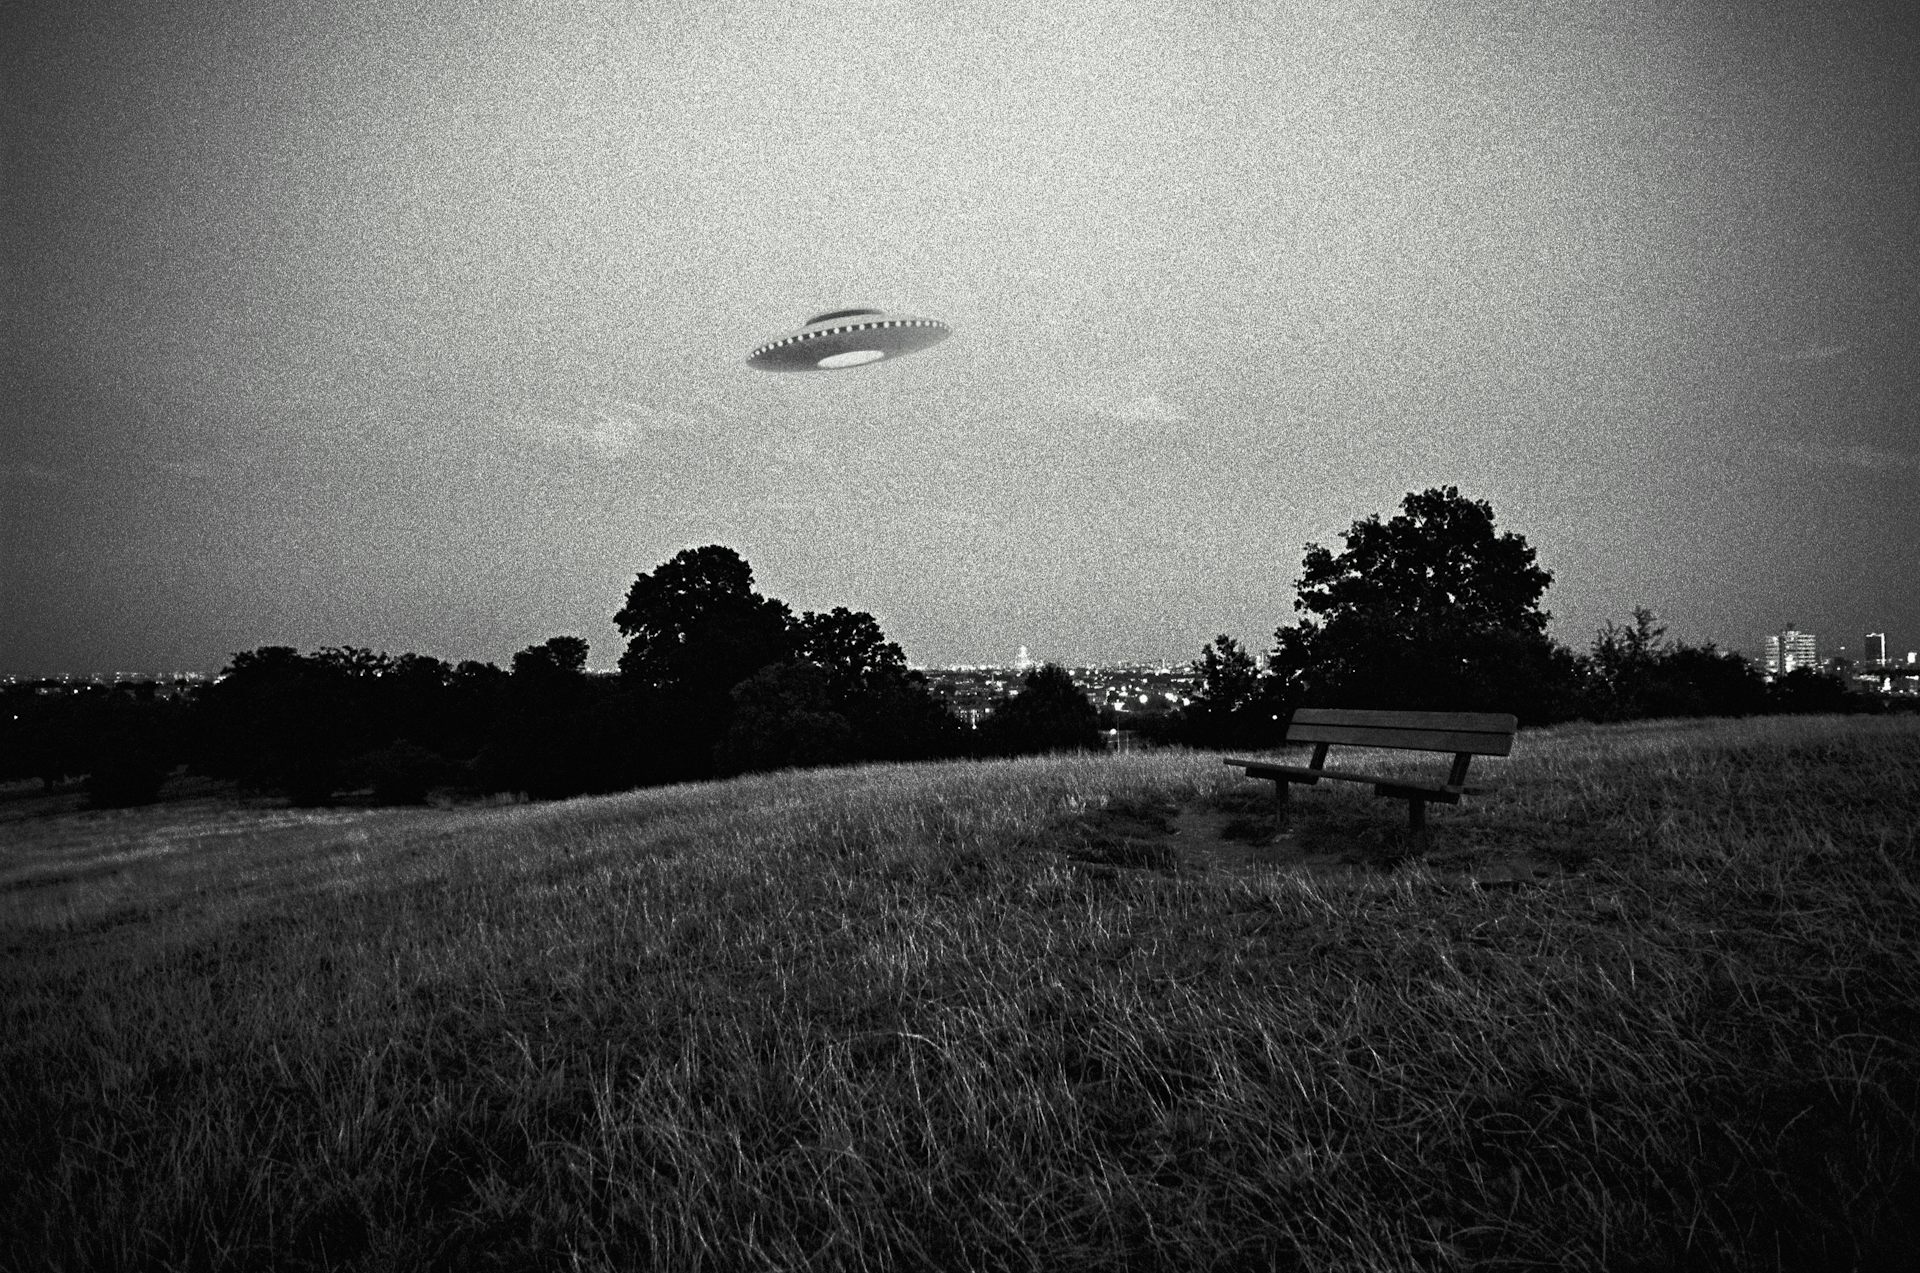 Why people tend to believe UFOs are extraterrestrial